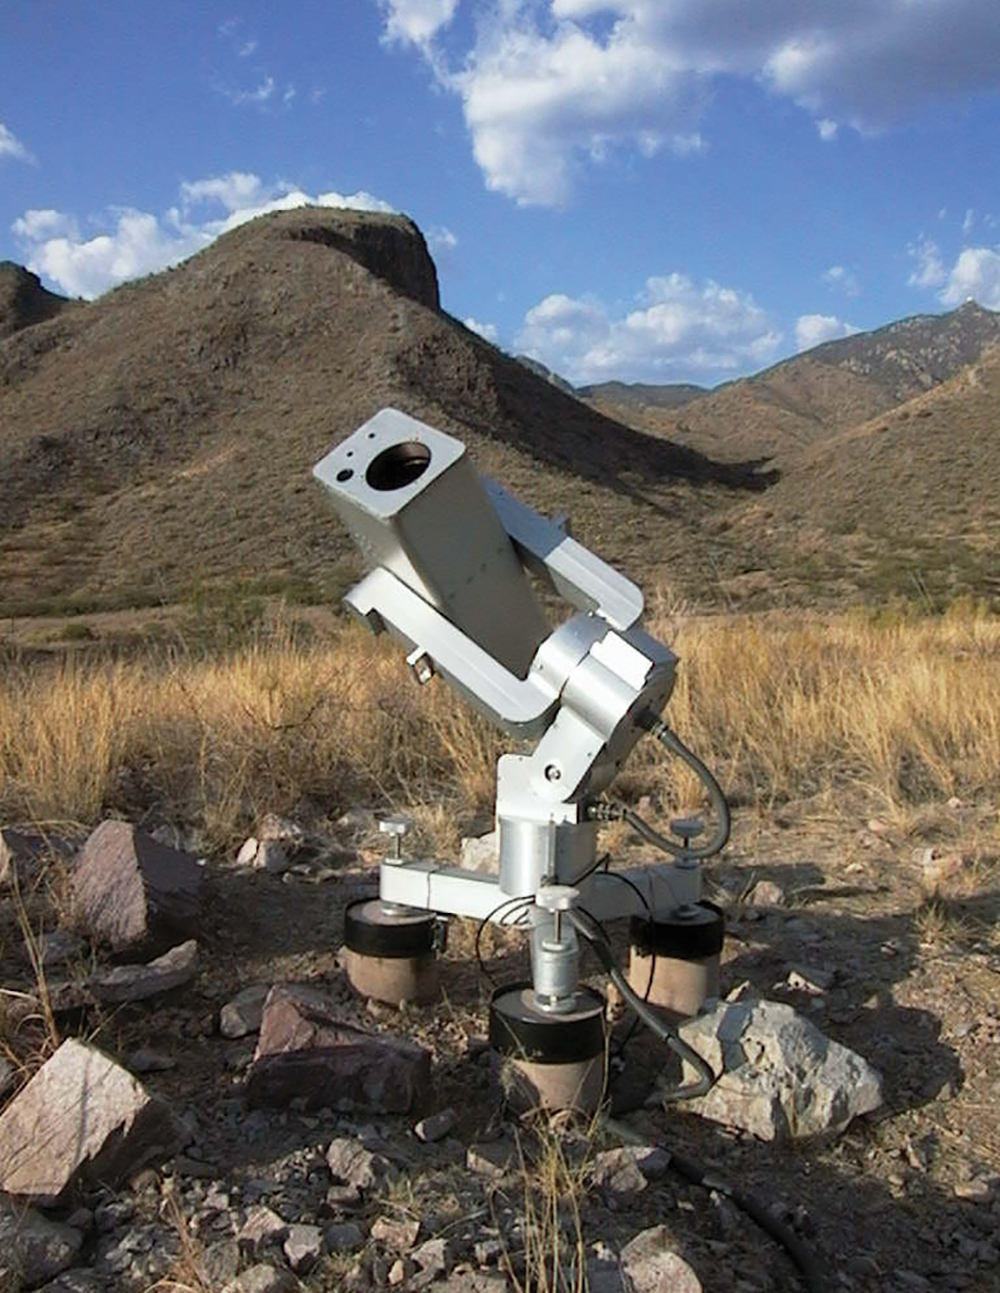 One of several MicroObservatory robotic telescopes used by YouthAstroNet participants. Location: Fred Lawrence Whipple Observatory, Arizona.